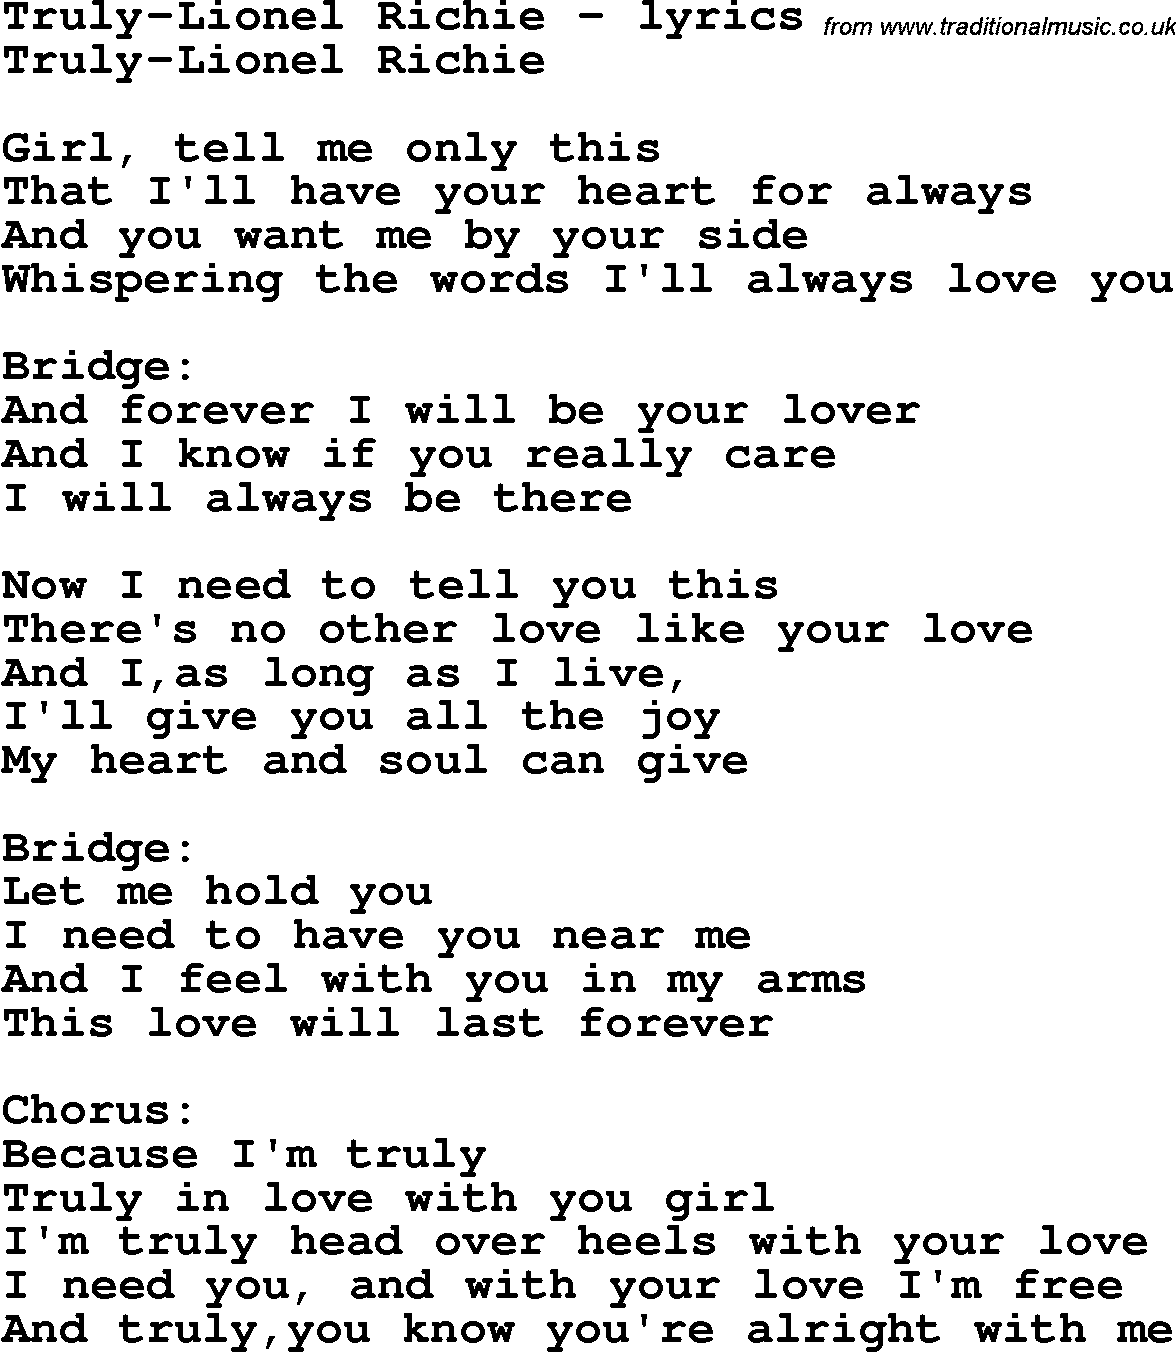 Love Song Lyrics for: Truly-Lionel Richie